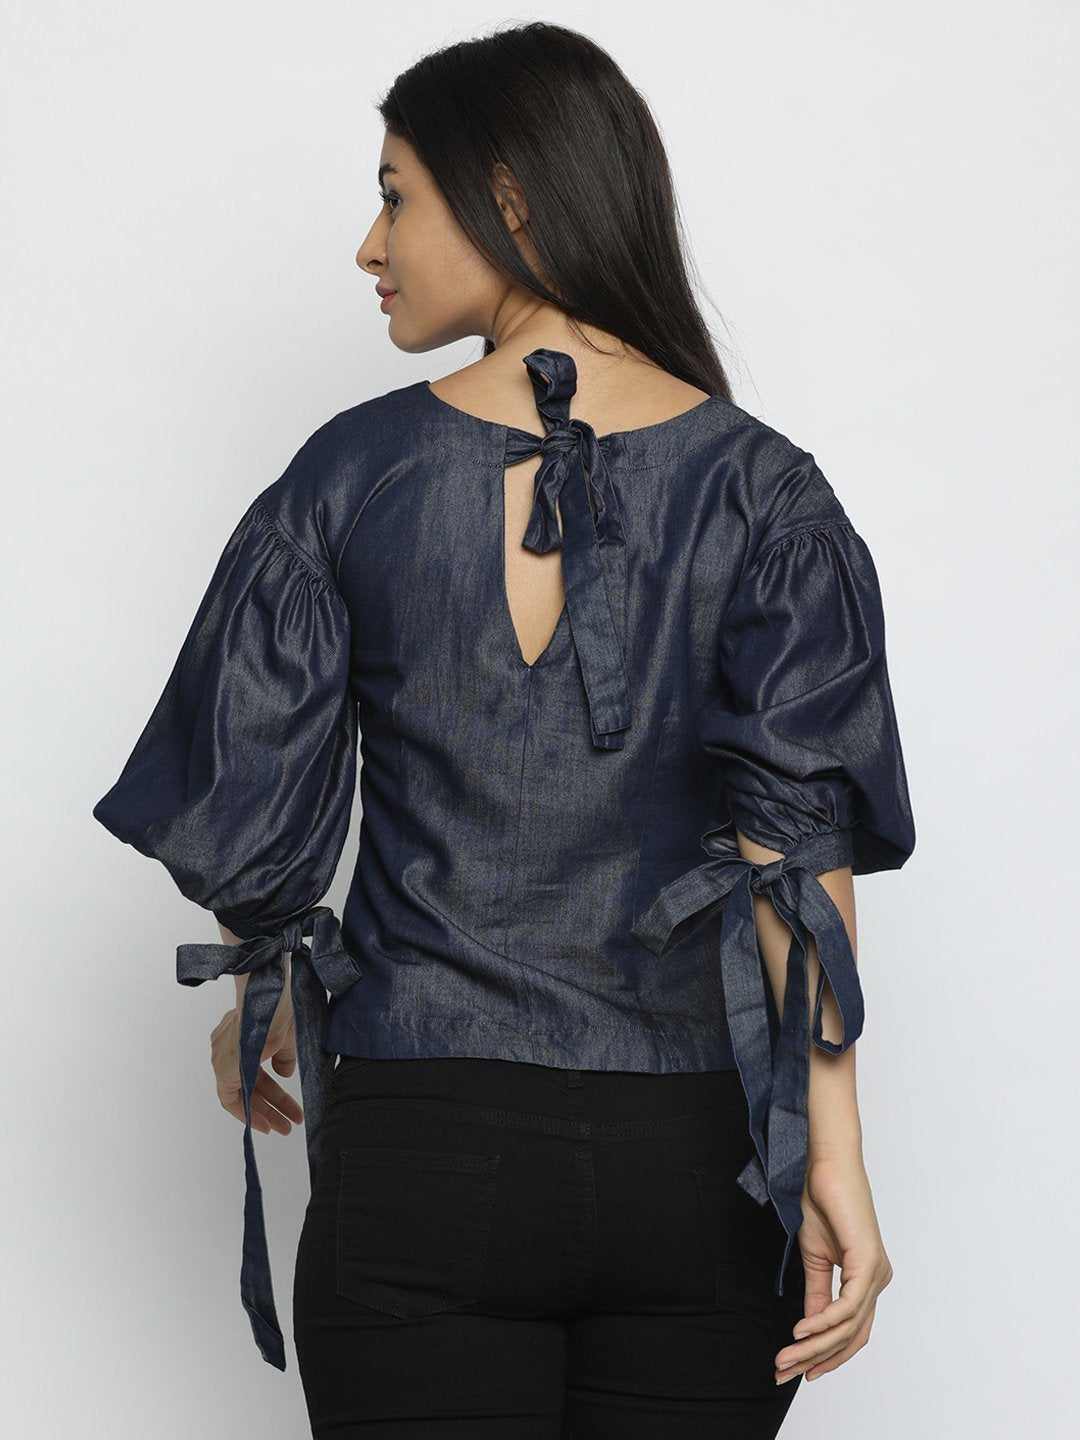 IS.U Chambray Boat Neck Top